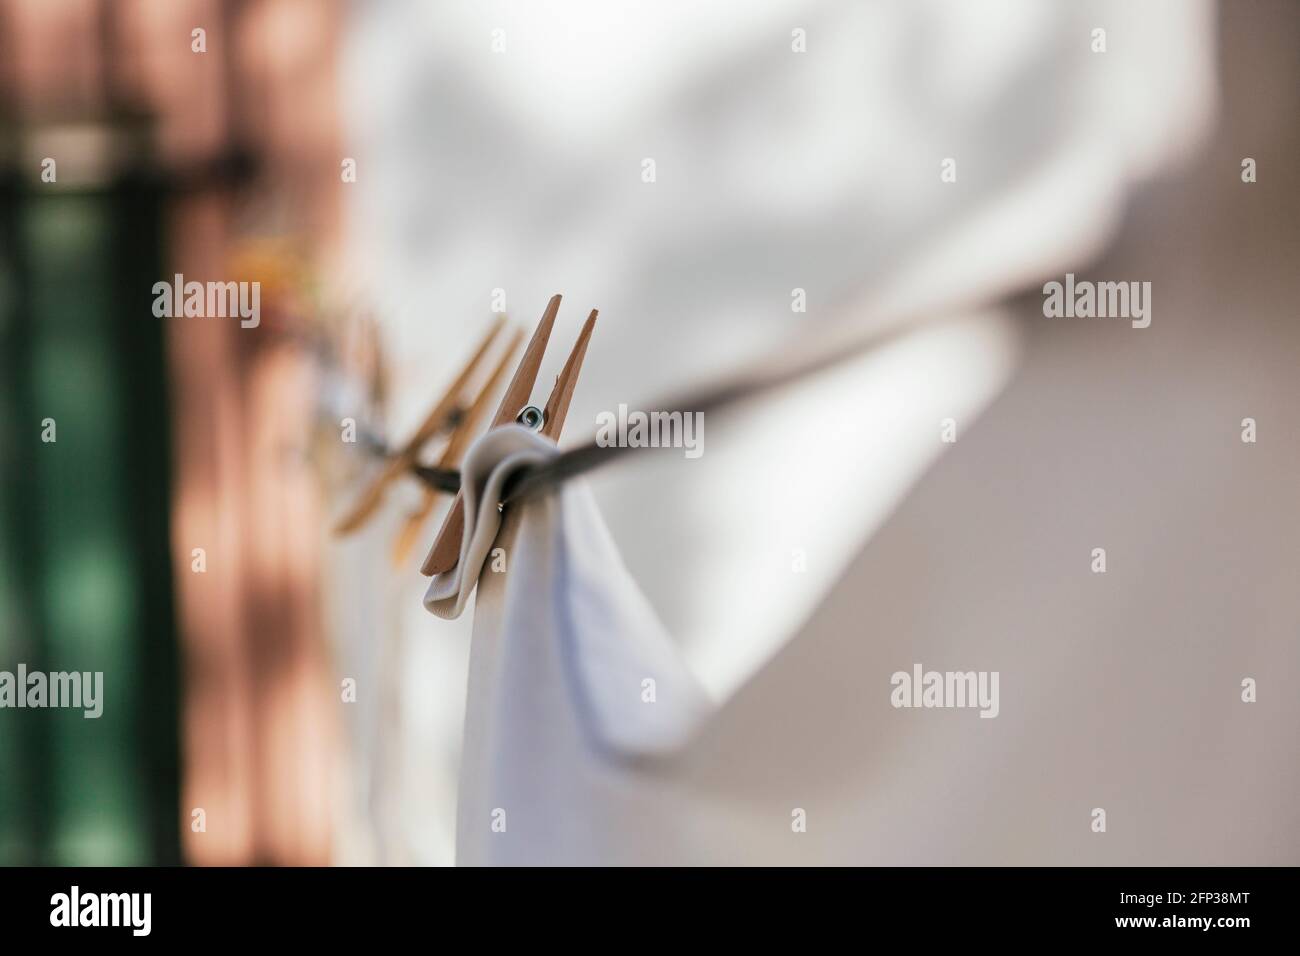 White clothes hanging on a clothesline with wooden clothespins. The clamp is in focus, the rest is out of focus. A window with black bars can be seen Stock Photo